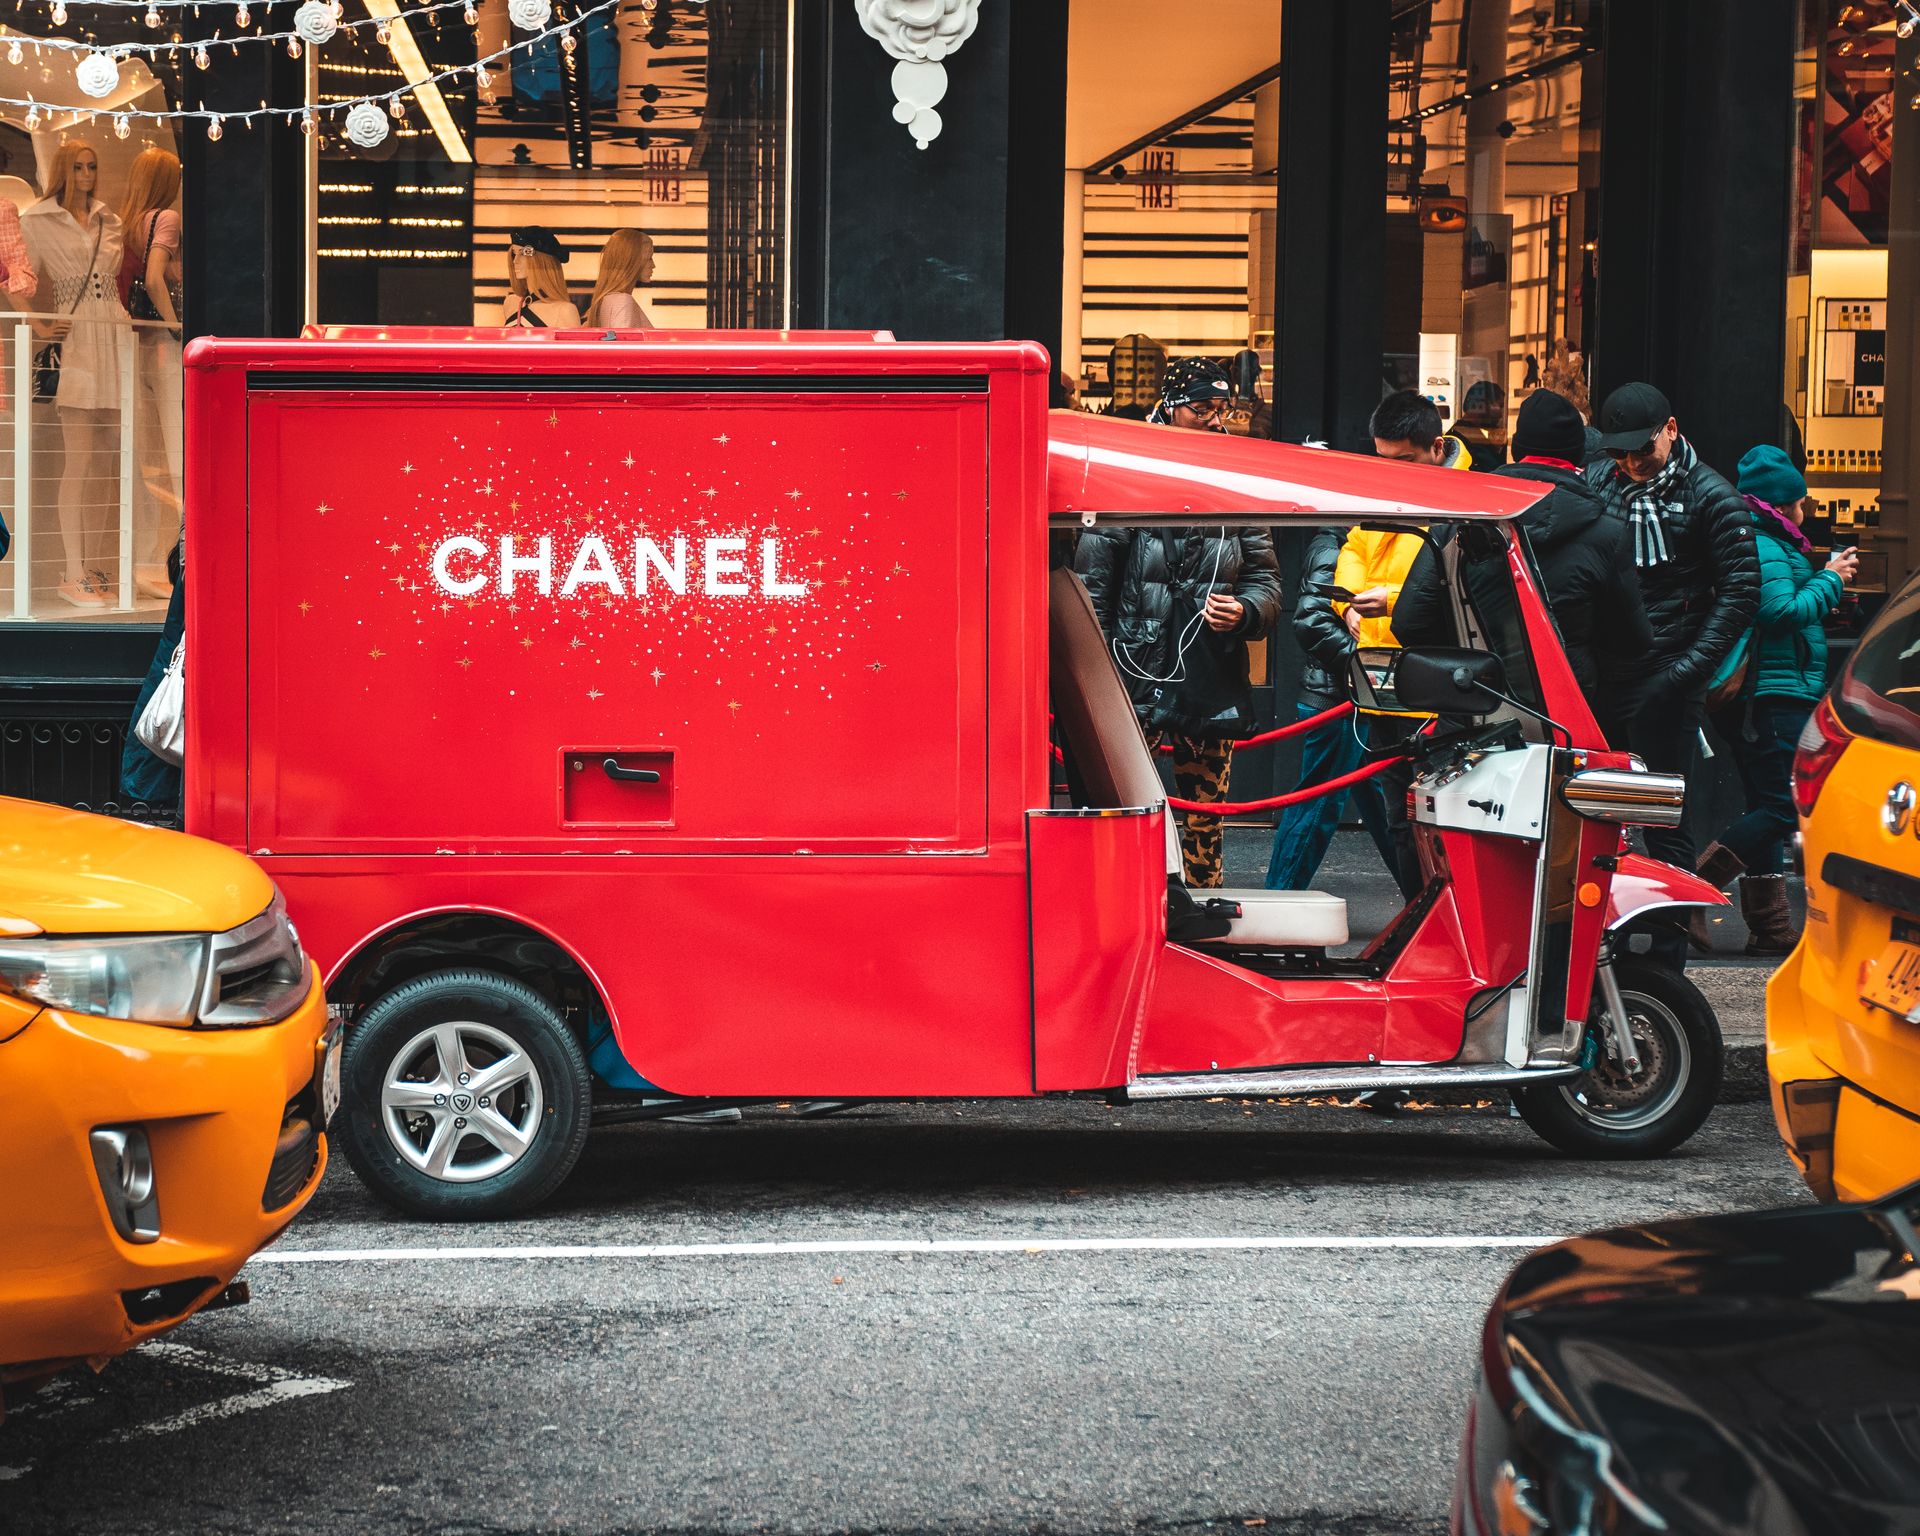 Chanel brand activation example